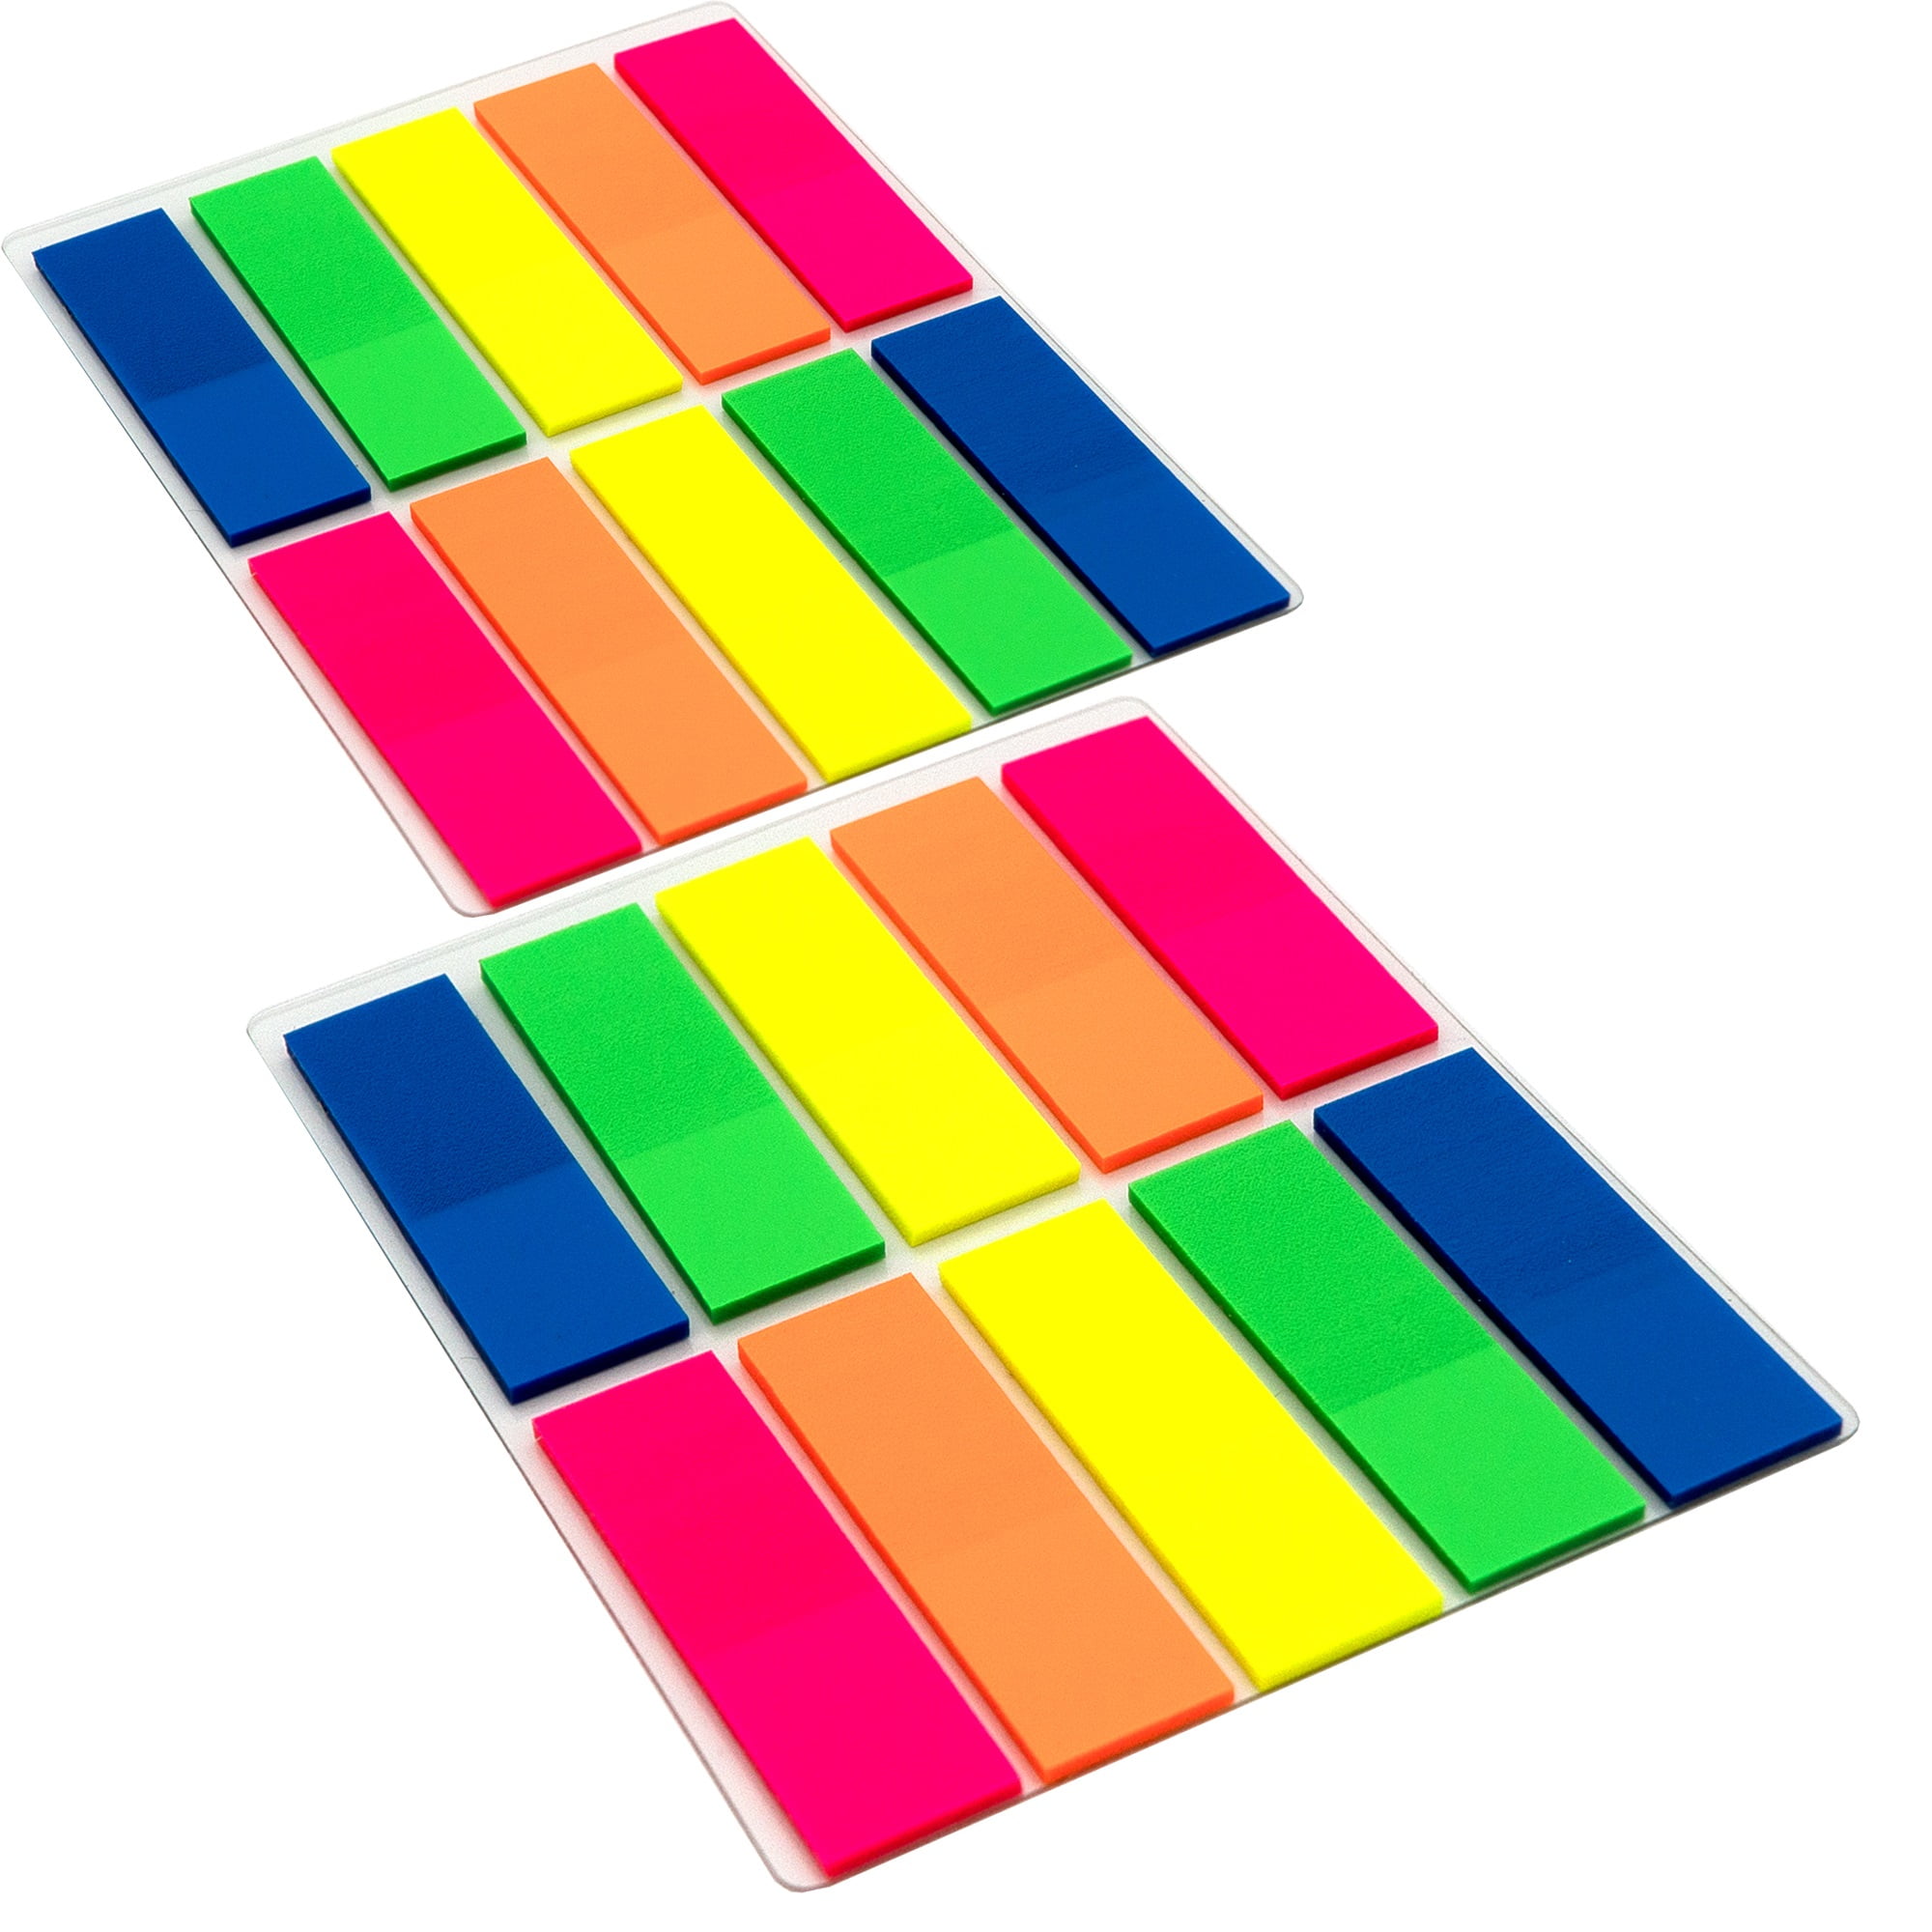 Reading Notes Writable and Repositionable File Tabs Flags Colored Page Markers Labels for Pages or Book Markers Sailing-go 400 Pieces Sticky Tabs 2 Inch Index Tabs Classify Files 20 Sets 10 Colors